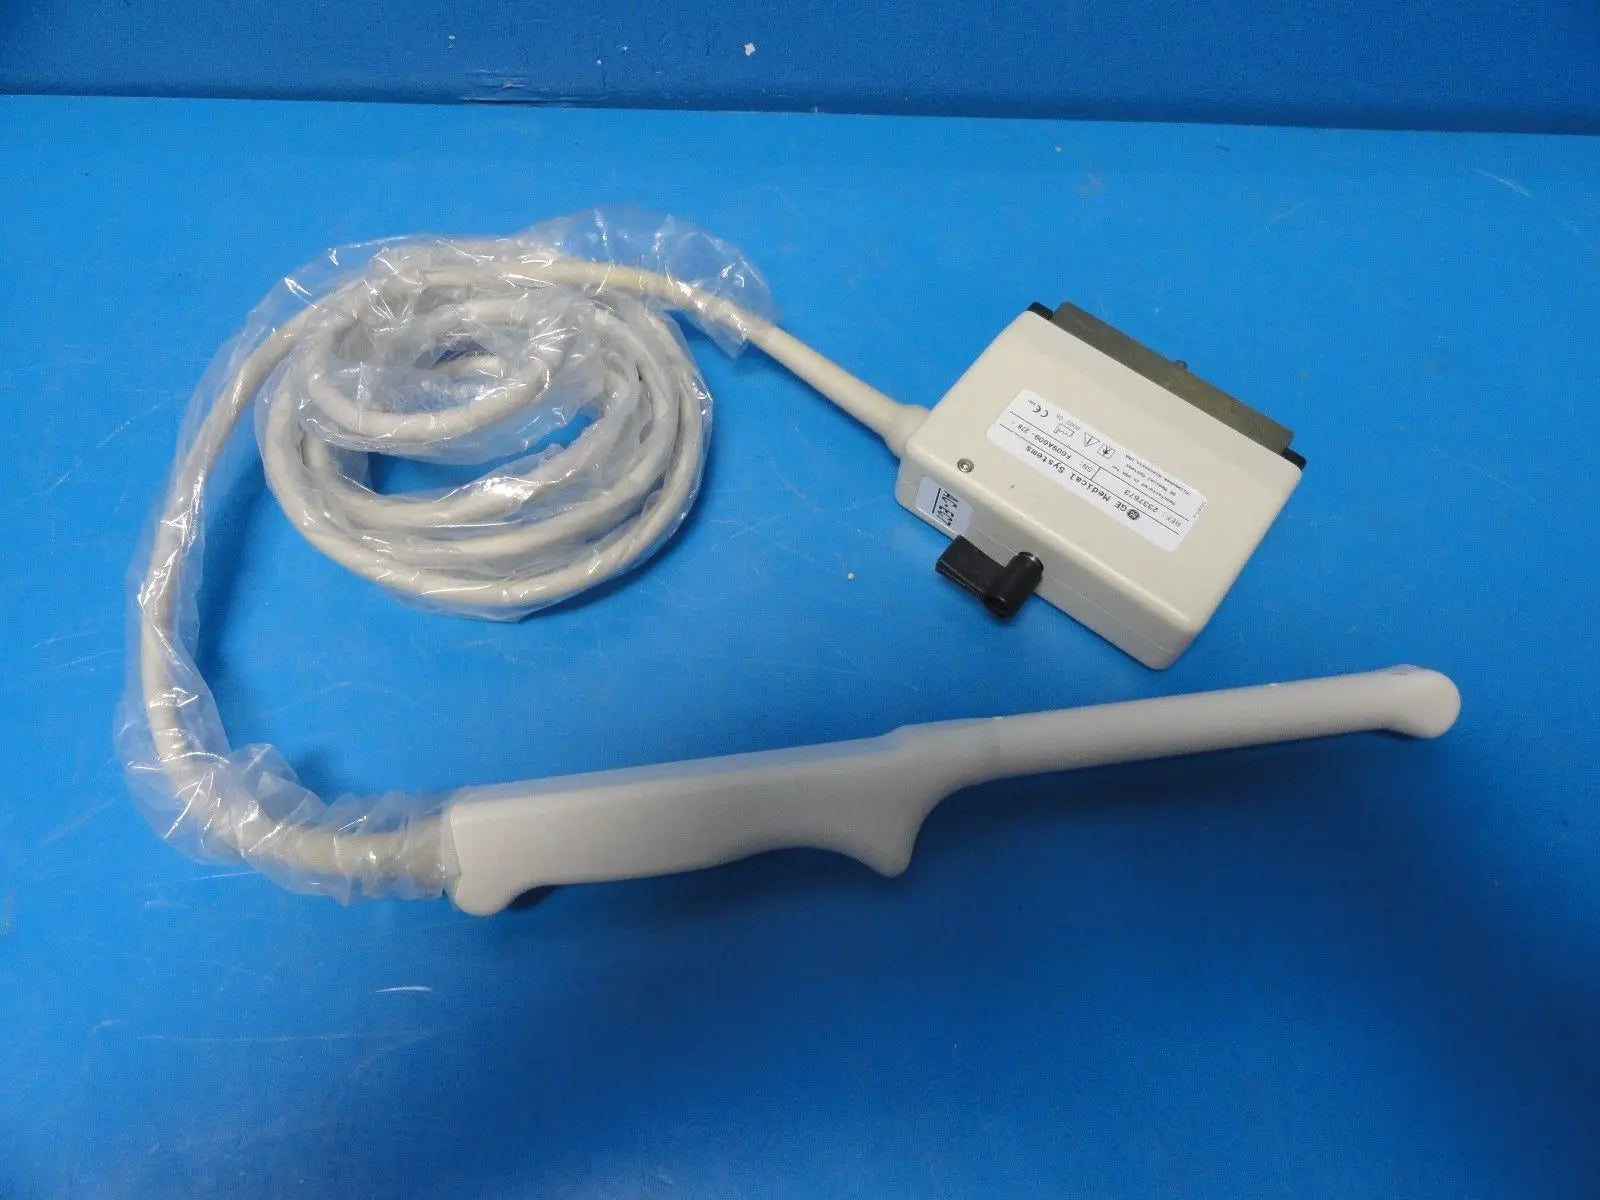 GE AC-EC7 P/N 2337673 Convex Endocavitary / Endovaginal Ultrasound Probe (8675) DIAGNOSTIC ULTRASOUND MACHINES FOR SALE